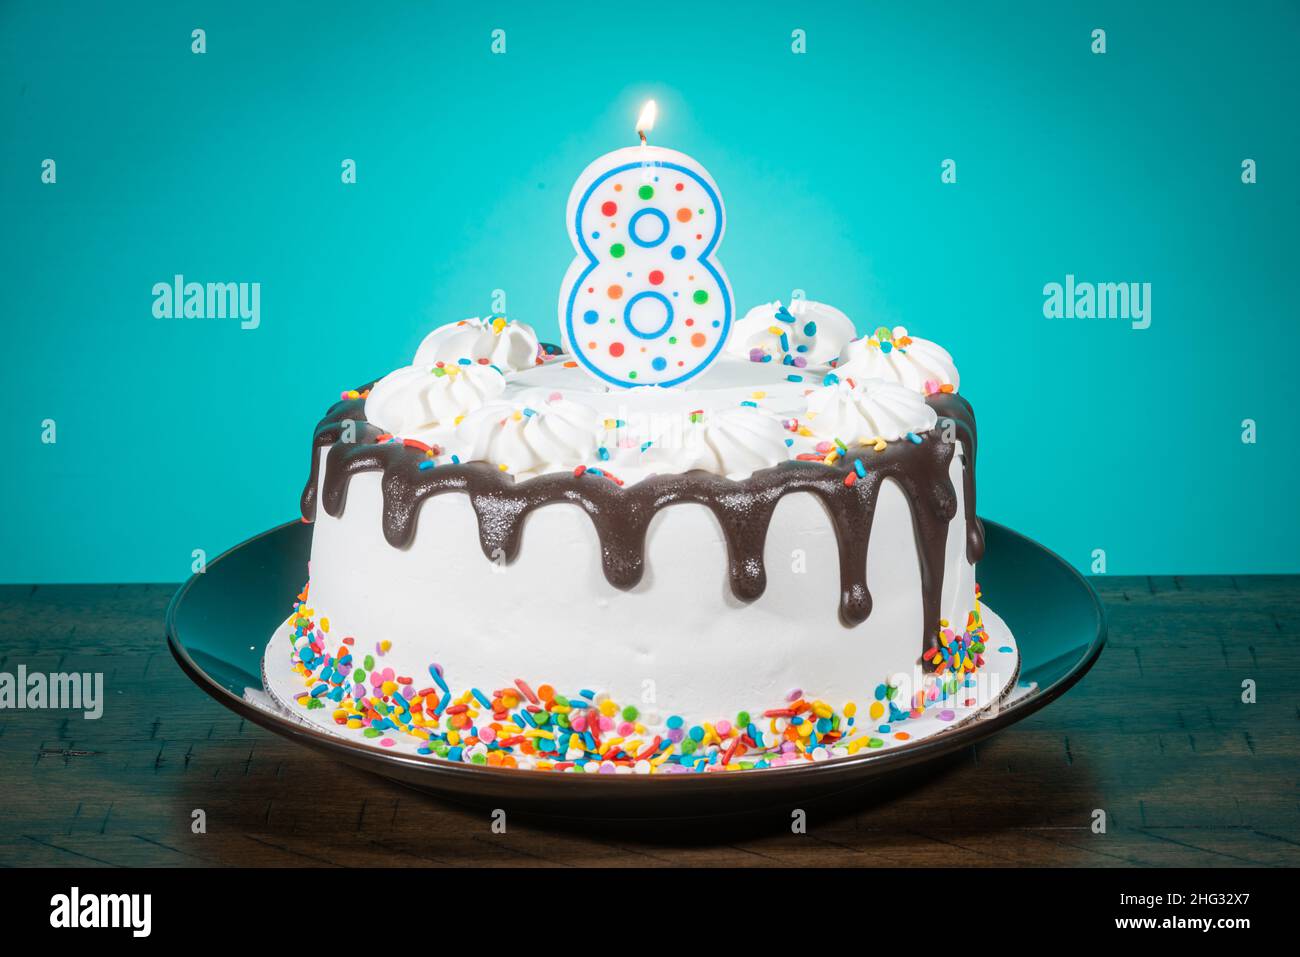 A birthday cake bears a candle in the shape of the number 8. Stock Photo